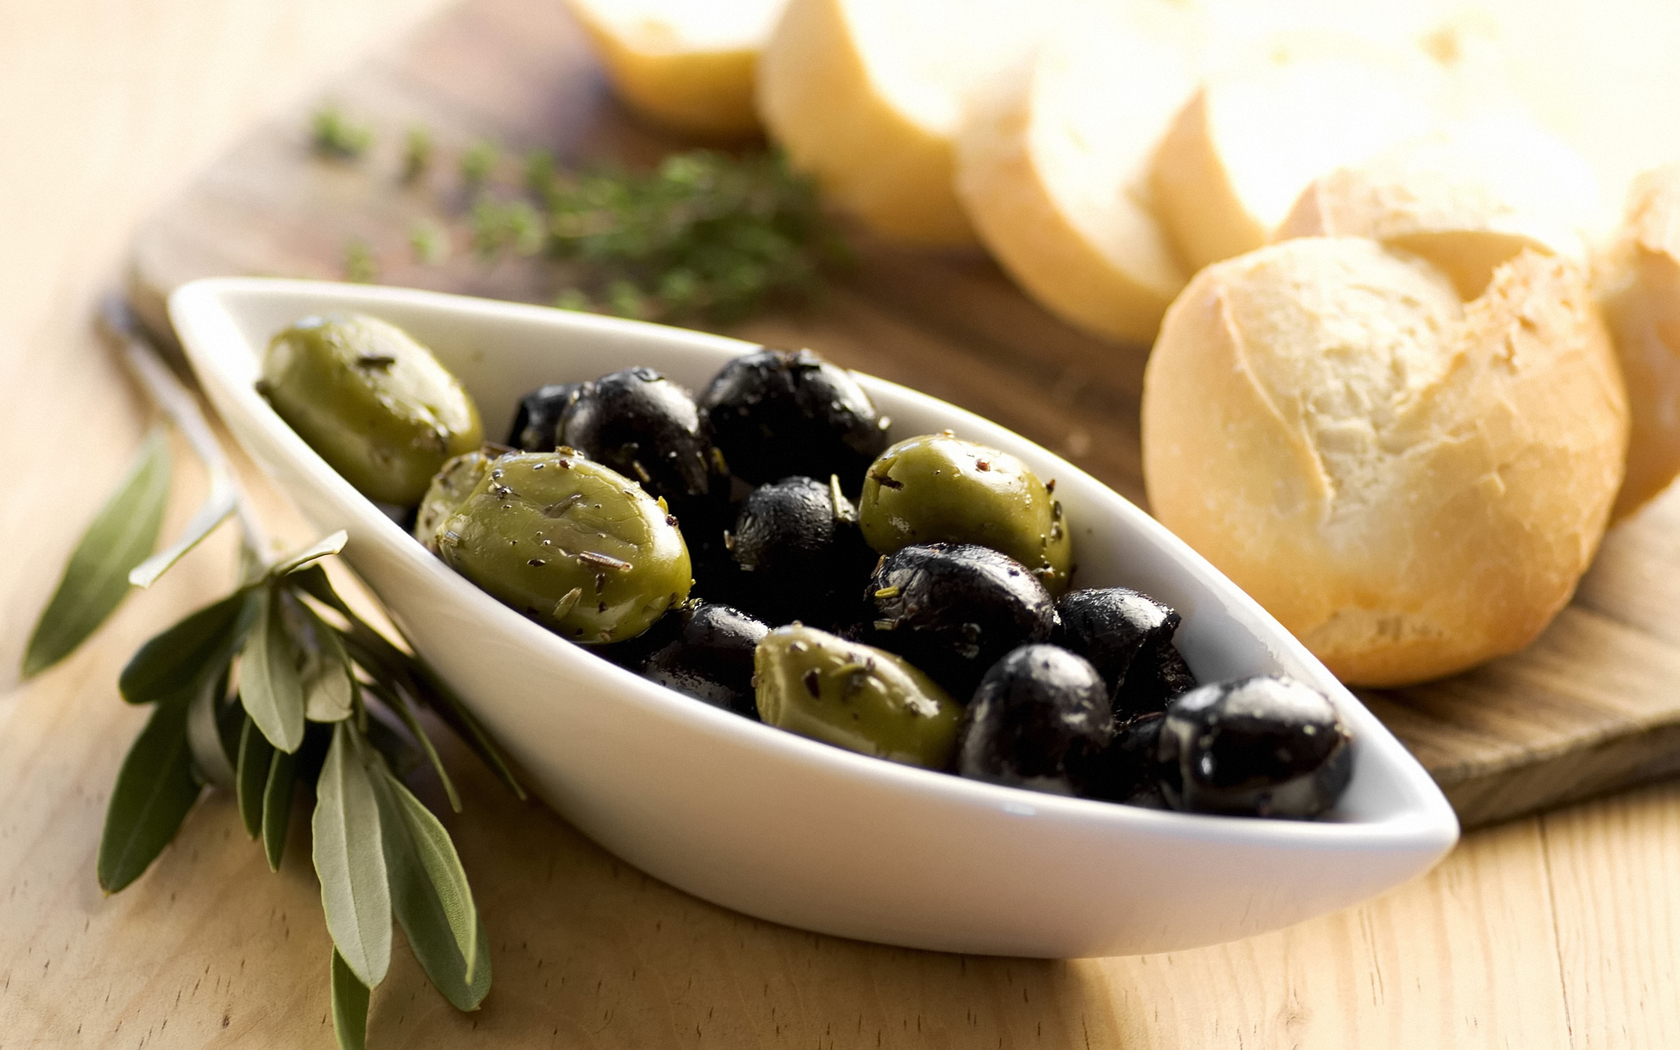 Feasibility study on a packing machine for pickled black olives